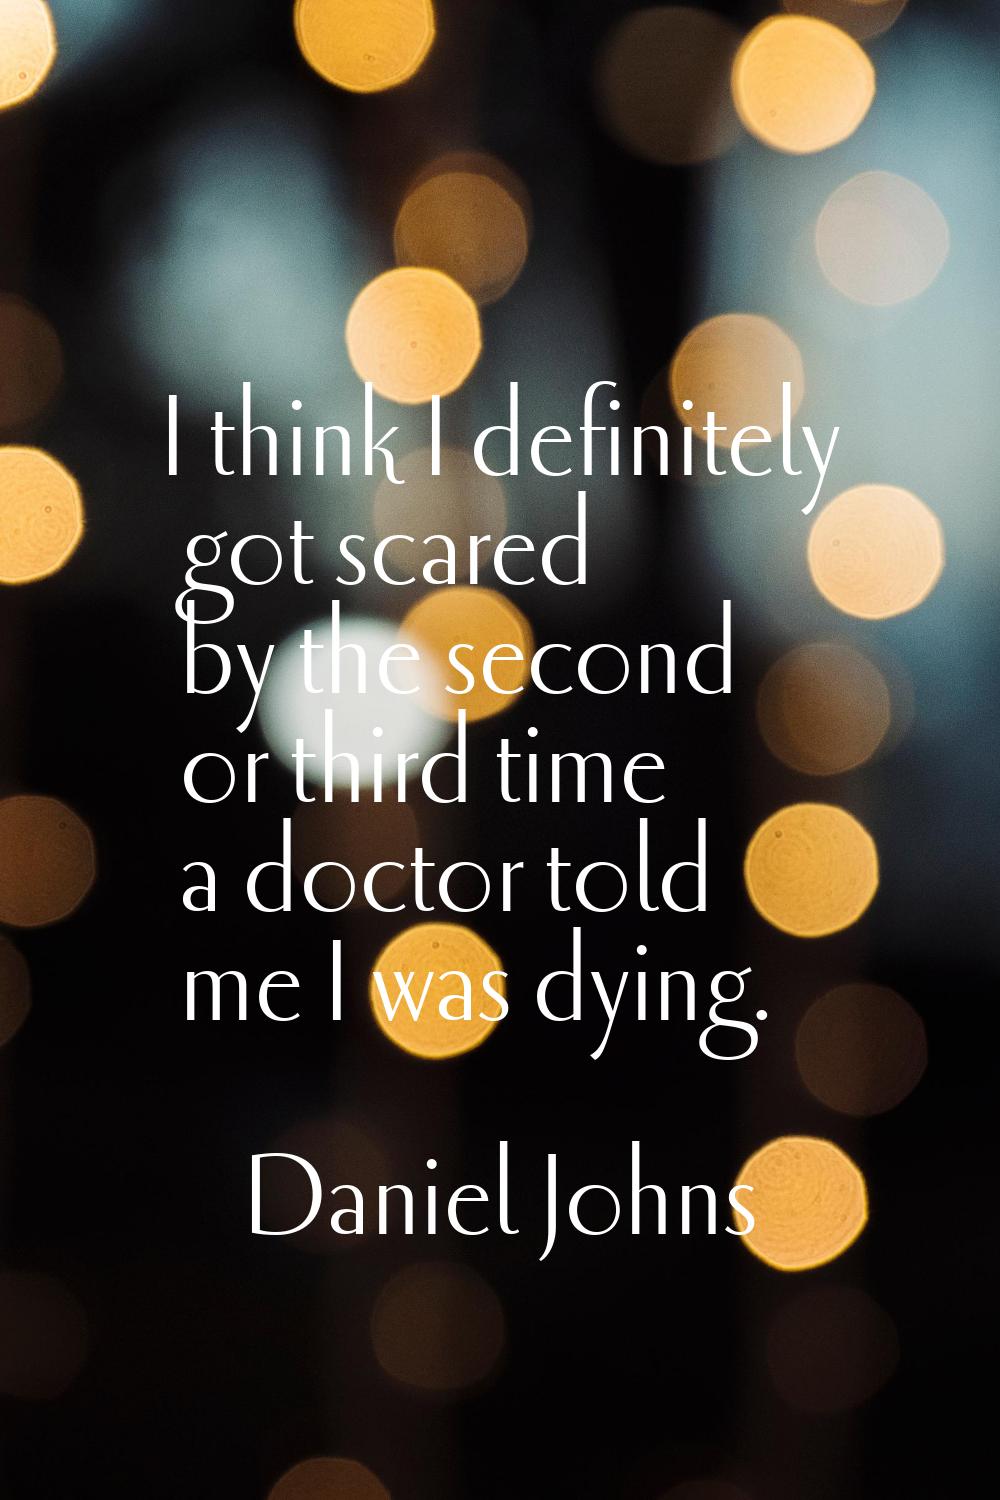 I think I definitely got scared by the second or third time a doctor told me I was dying.